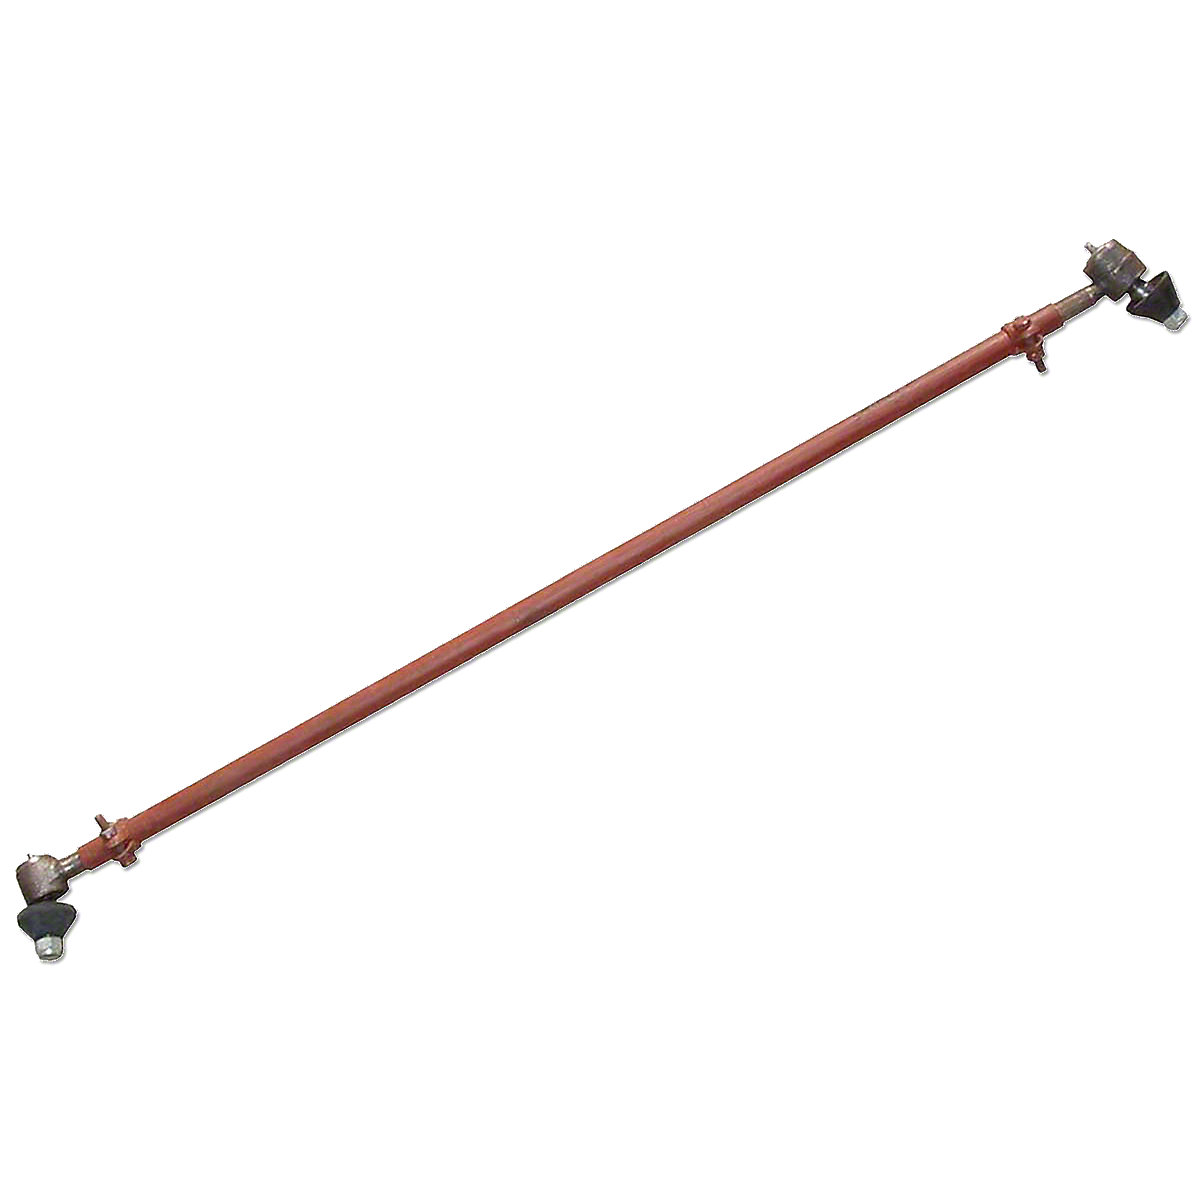 Complete Tie Rod Assembly For Massey Ferguson: TO35, 135, 230, 235, 35.